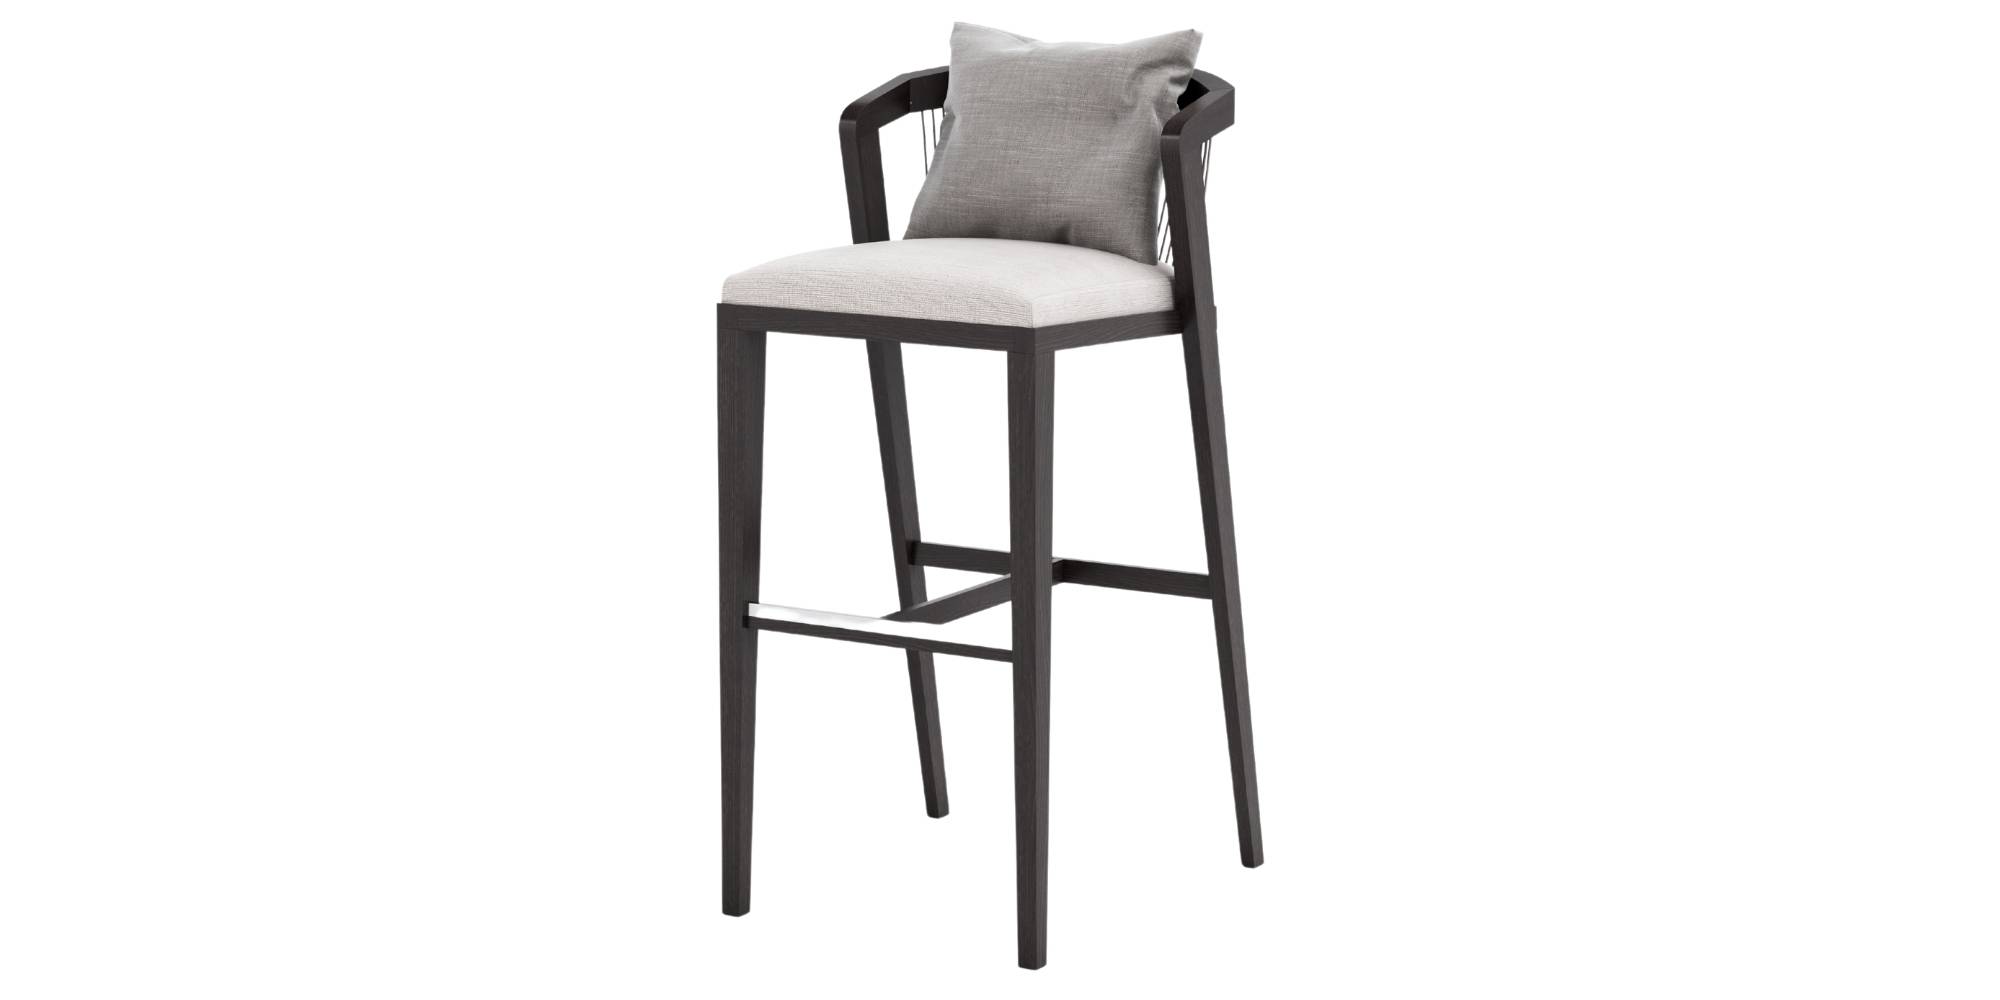 Porto Bar Stool in Outdoor Bar Stools for Porto collection